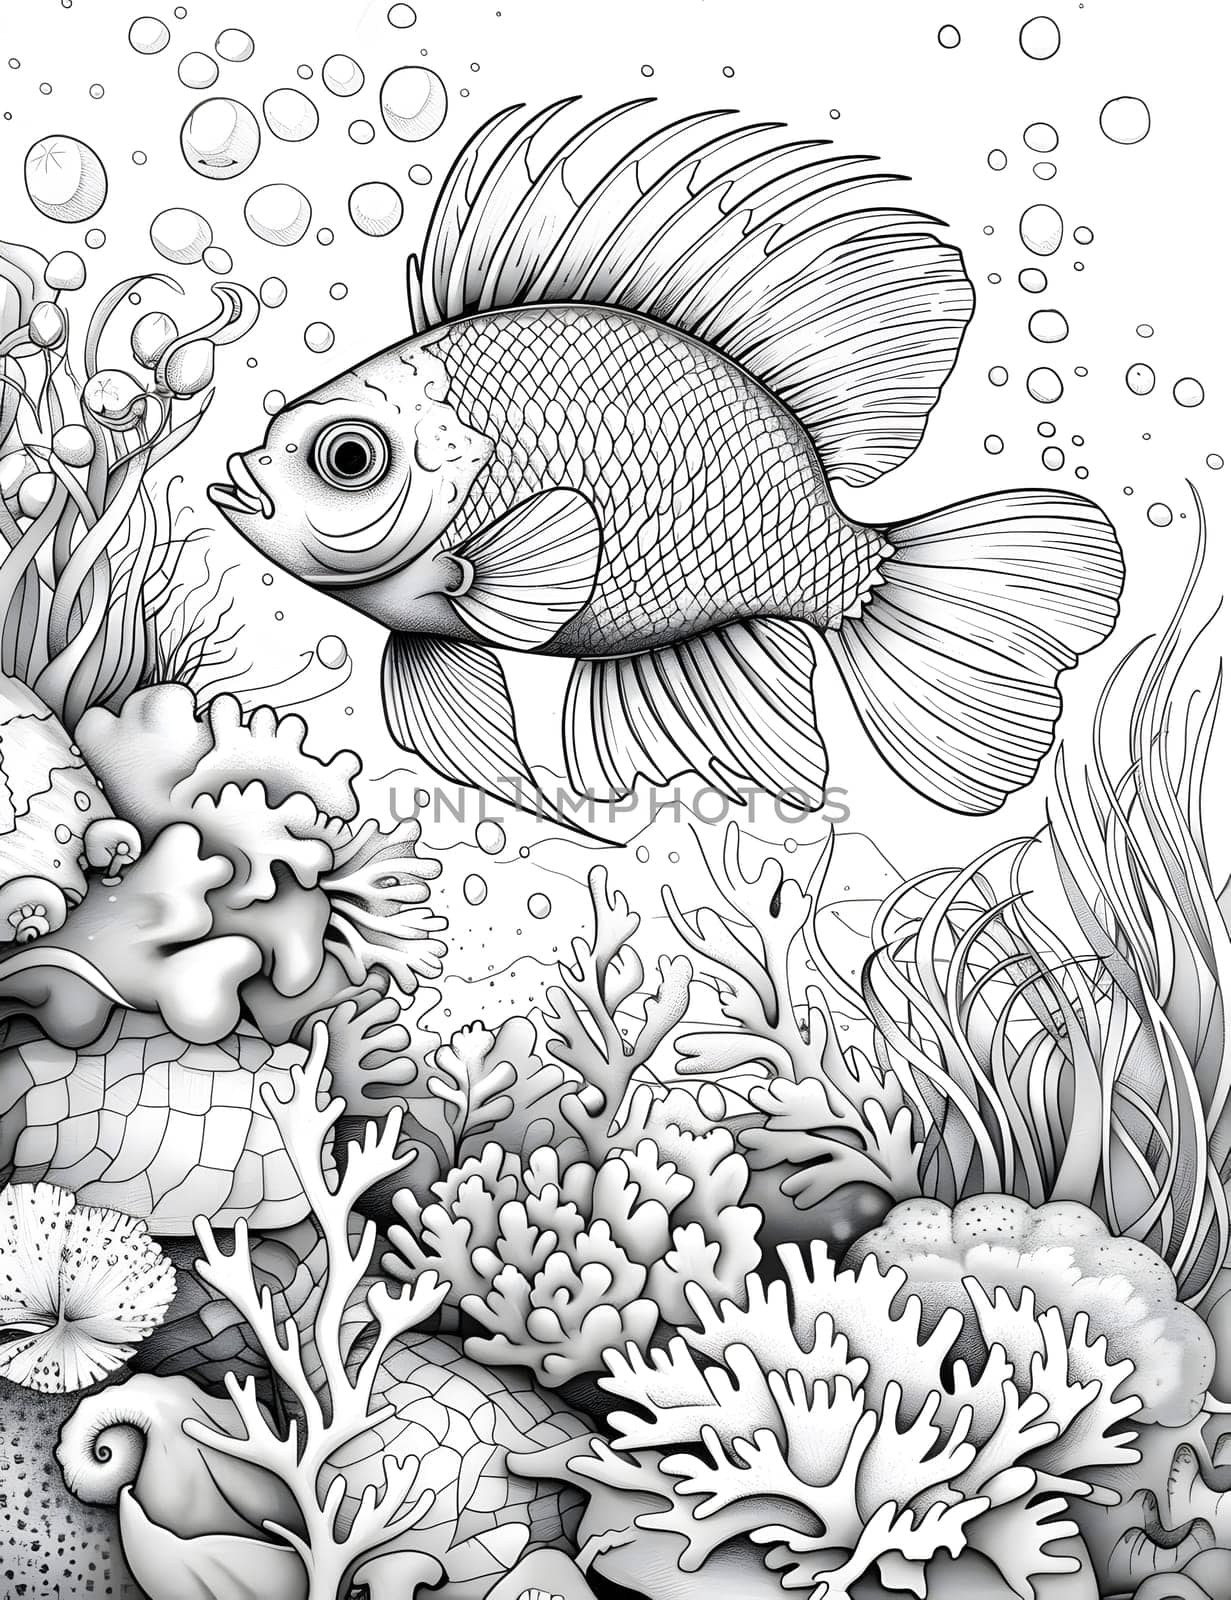 A monochrome illustration of a fish gracefully swimming among coral reefs, showcasing intricate patterns and detailed plant life